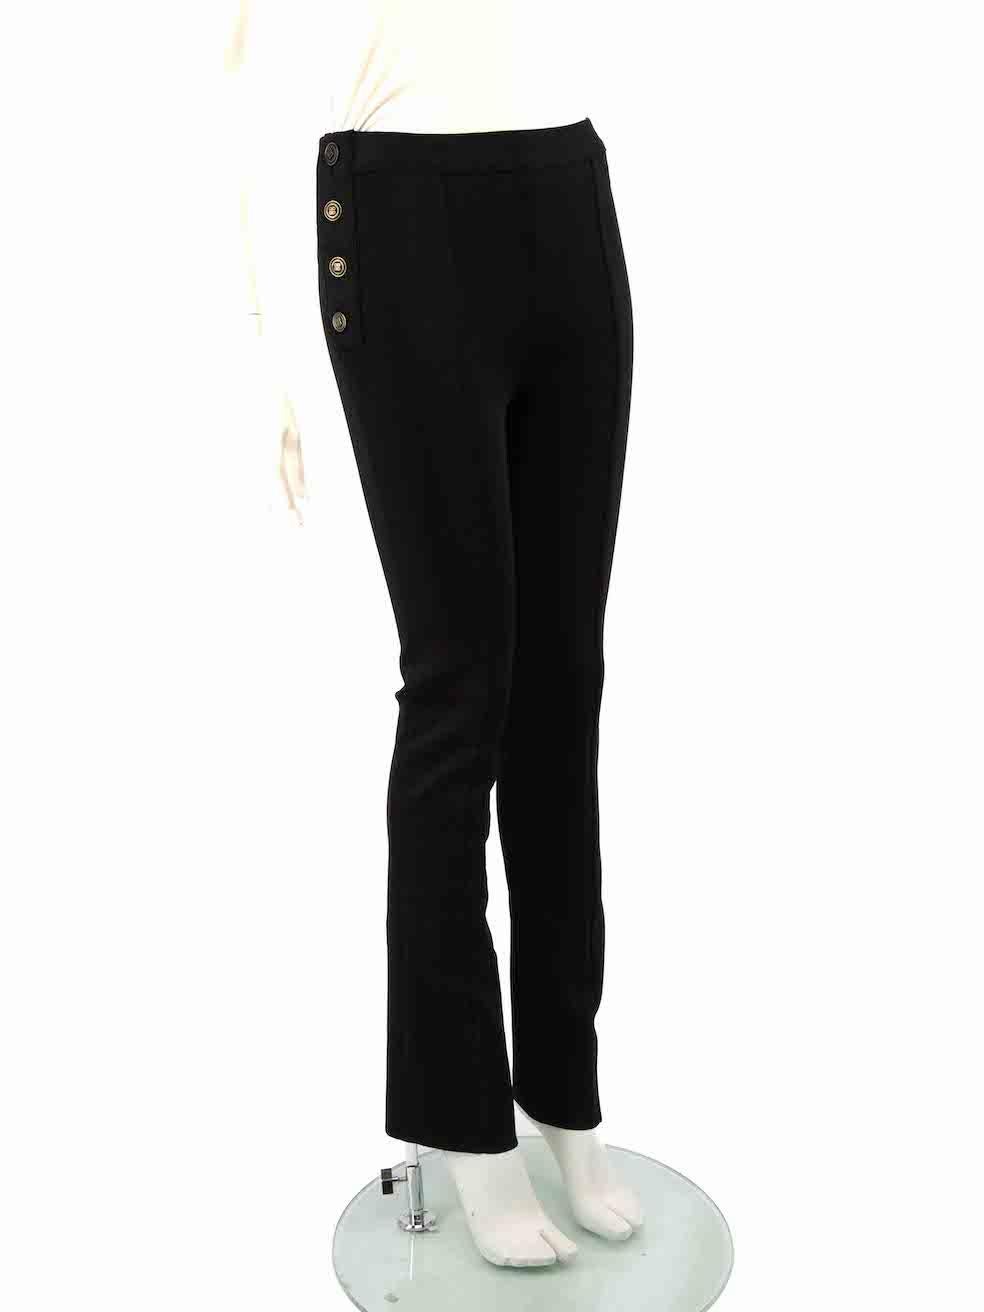 CONDITION is Very good. Hardly any visible wear to trouser is evident on this used Givenchy designer resale item.
 
 
 
 Details
 
 
 Black
 
 Viscose
 
 Skinny trousers
 
 High rise
 
 Stretchy
 
 Logo button detail on sides
 
 2x Side zip closure